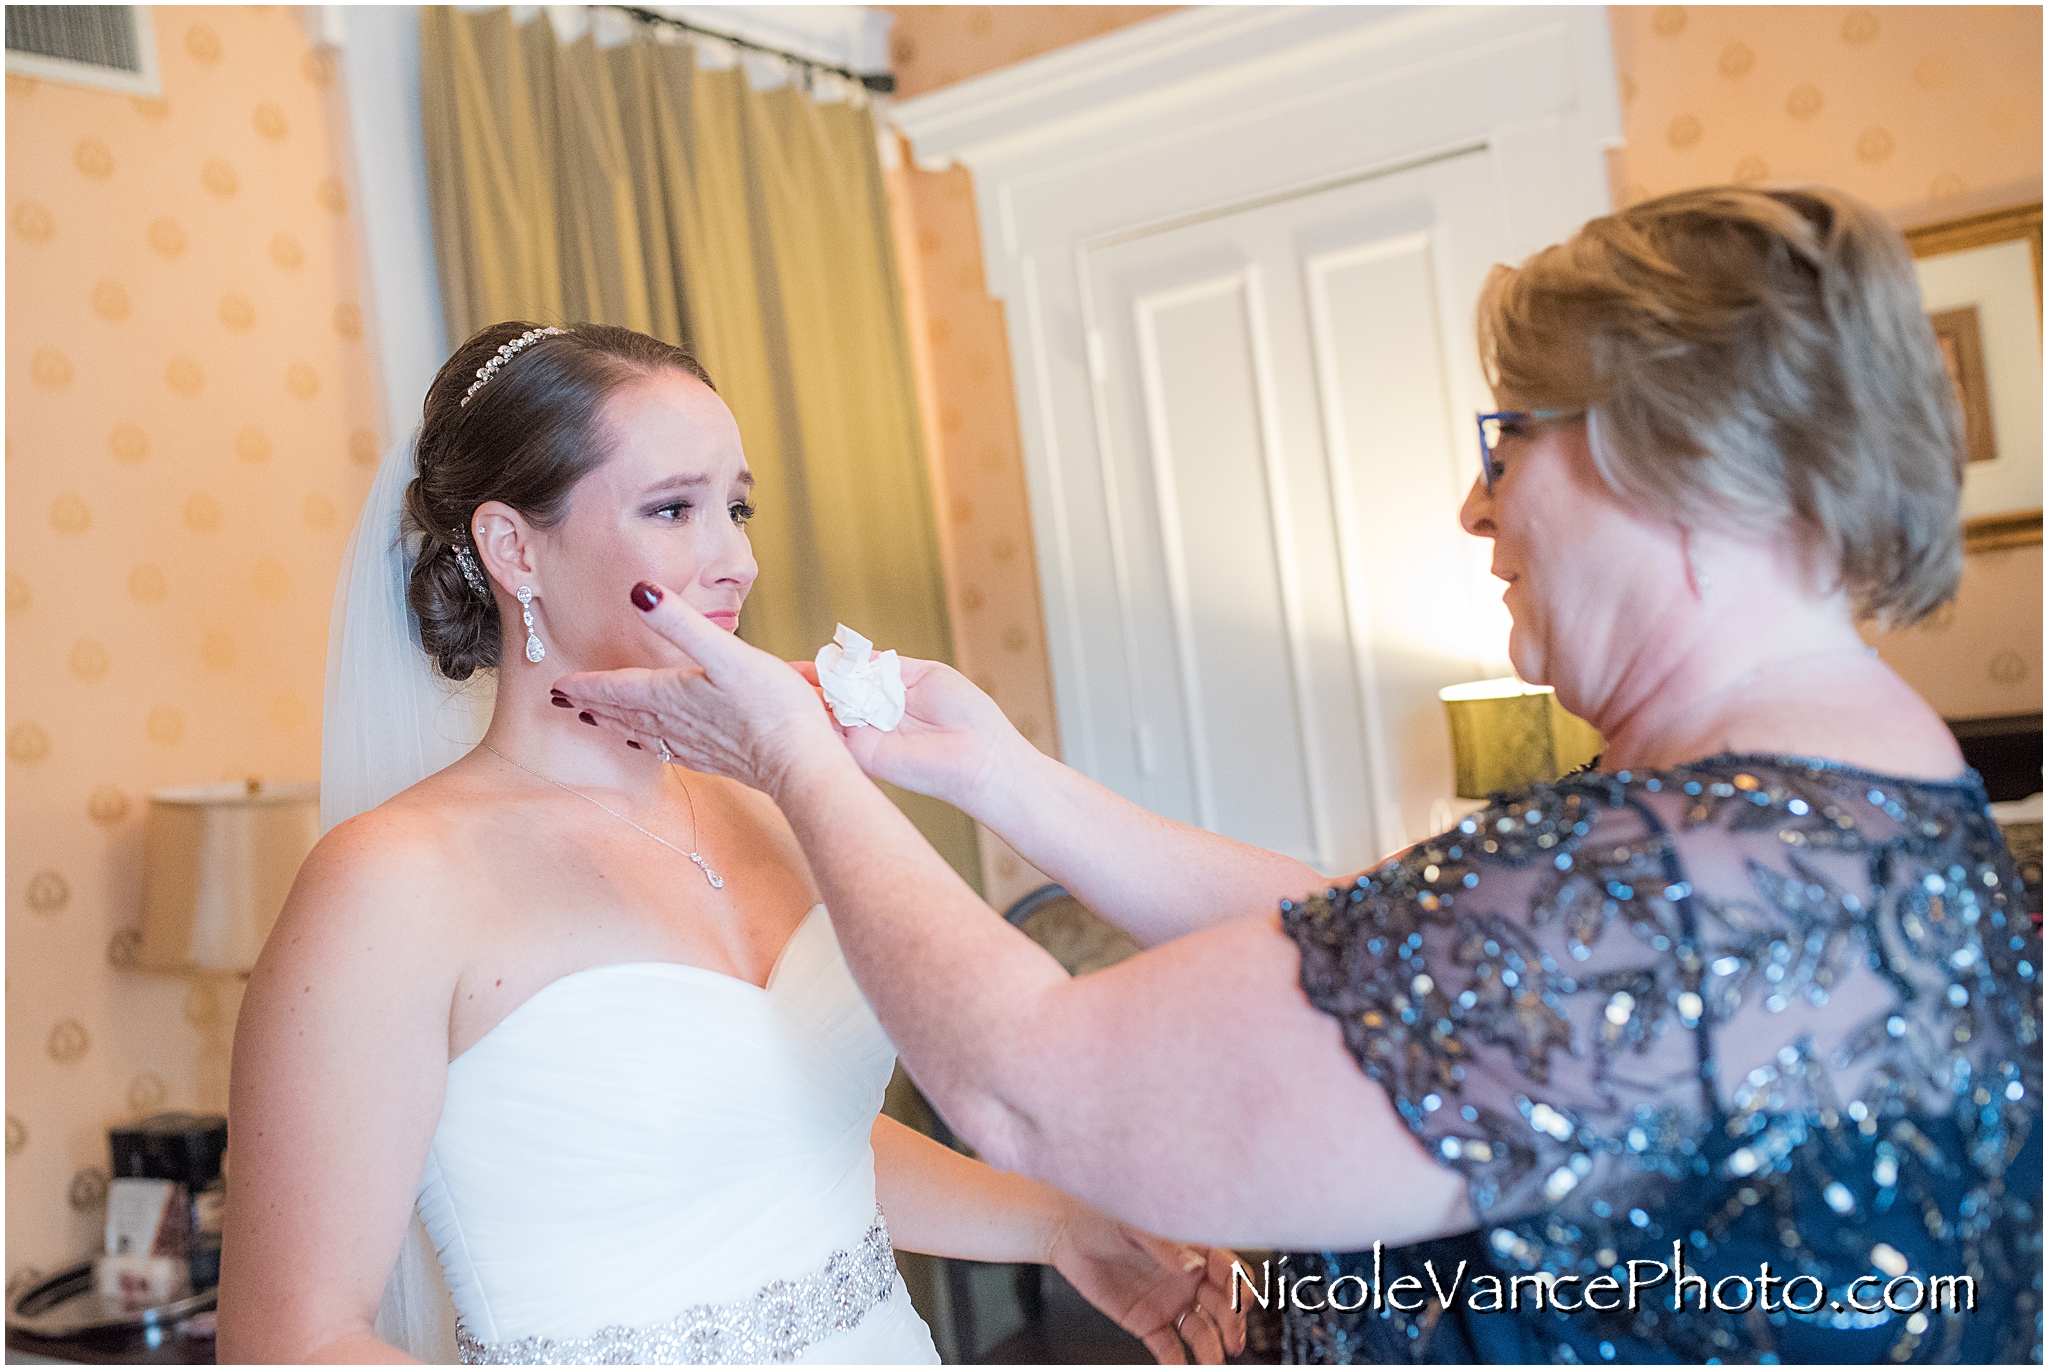 A tearful moment is shared between mom and daughter as they ready themselves to see her groom for the first time.